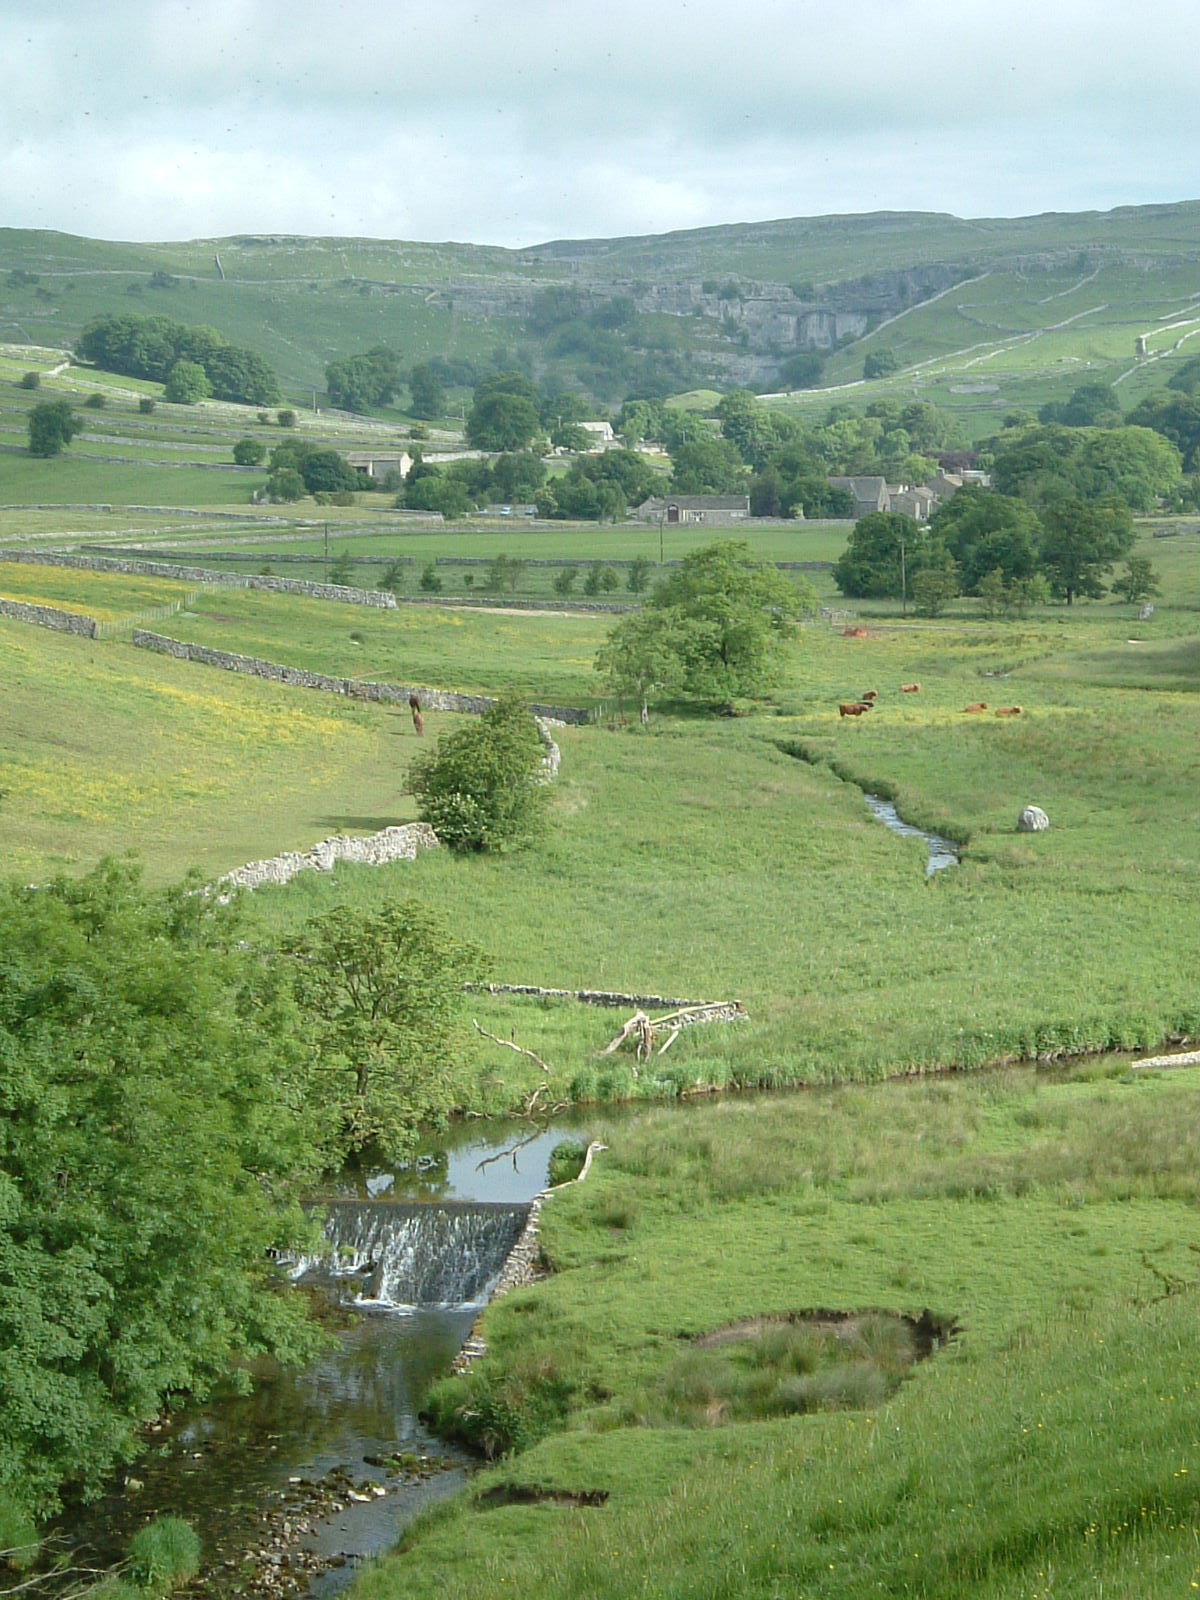 The village of Malham with Malham Cove in the distance